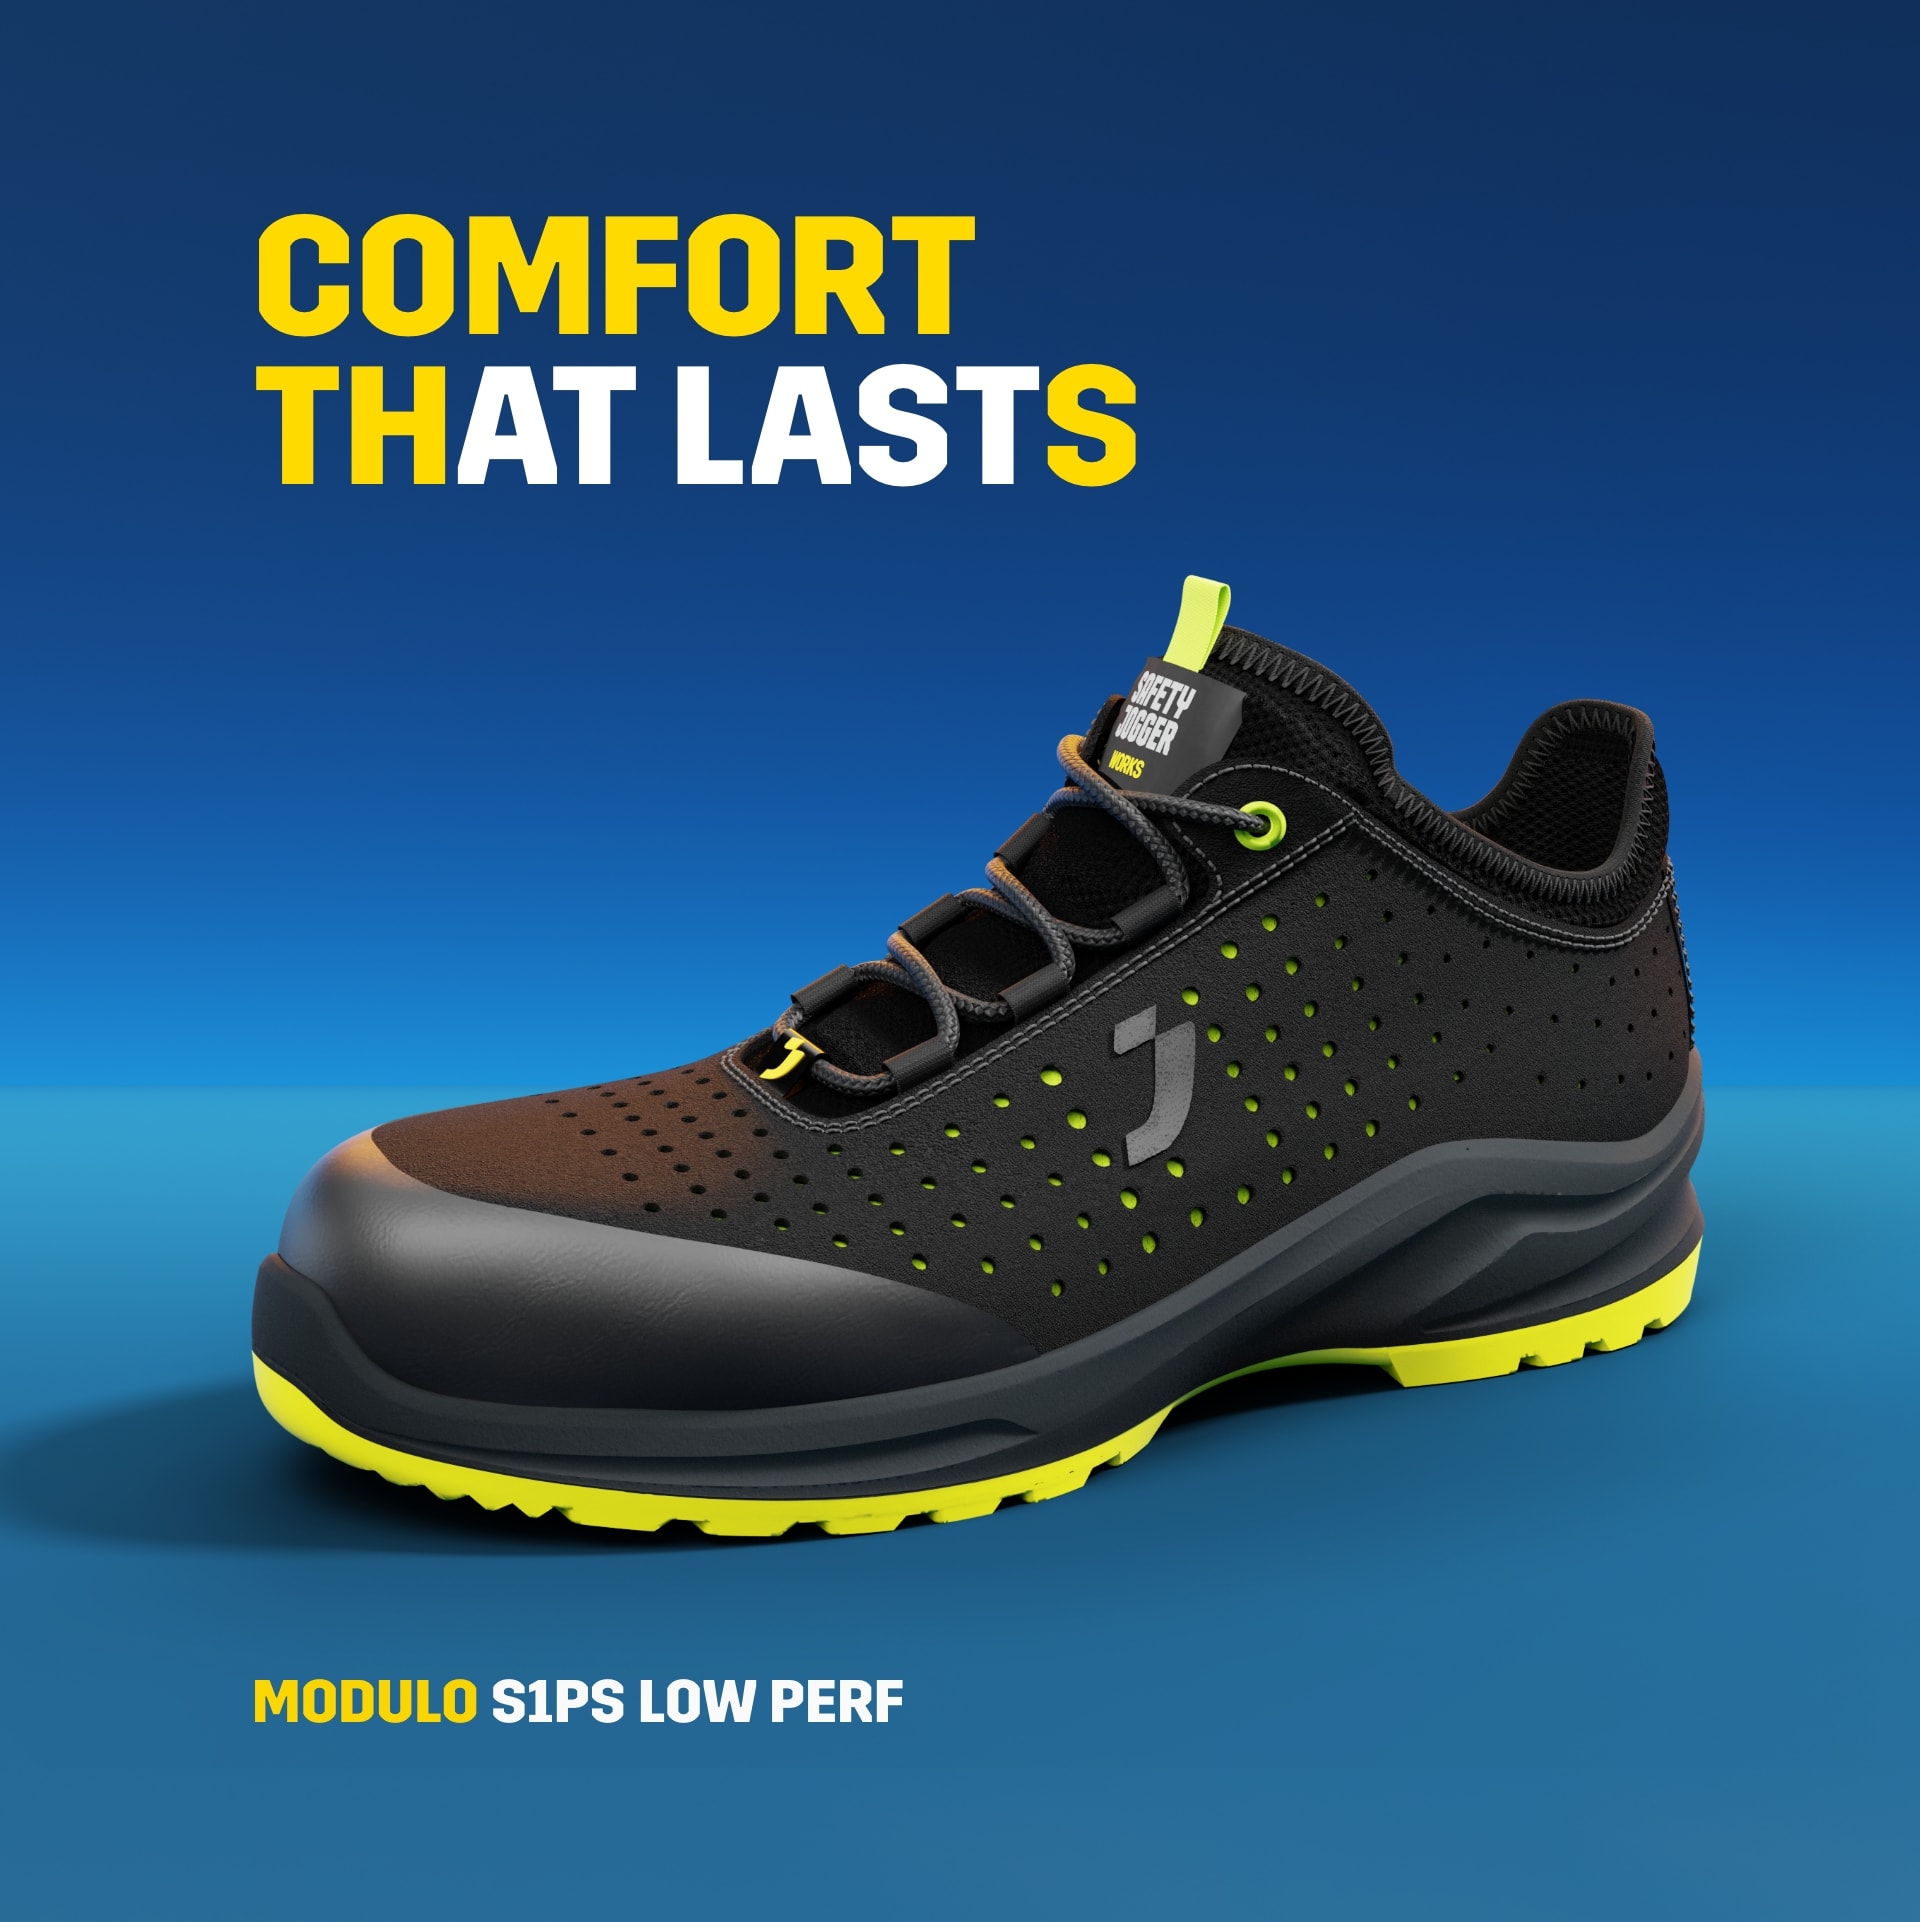 Image of the MODULO S1PS LOW PERF shoe